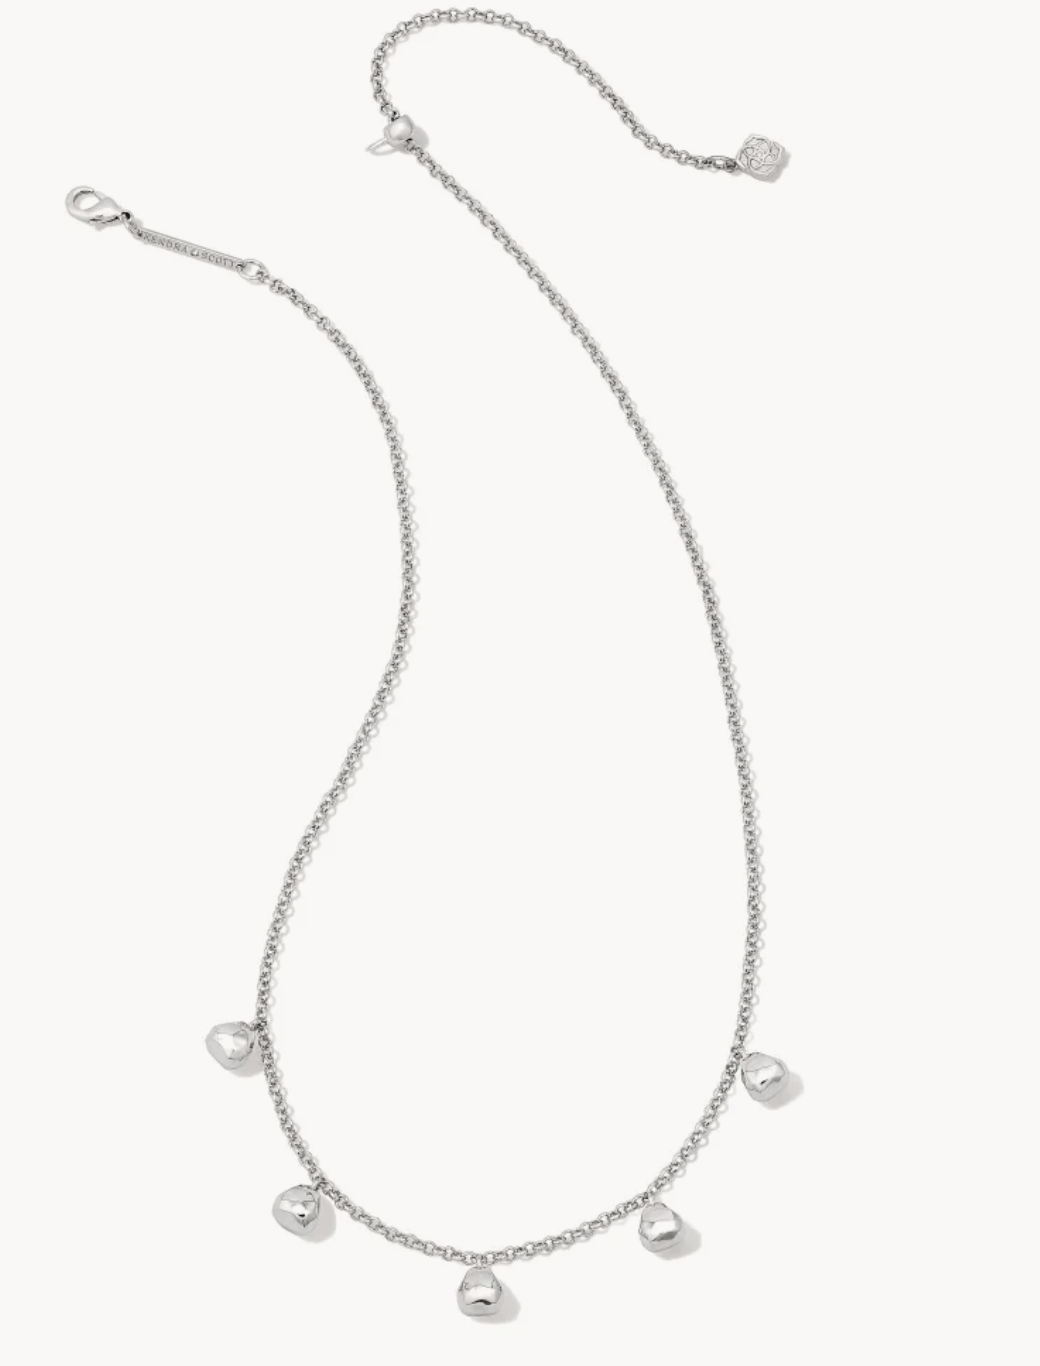 Gabby Strand Necklace in Silver - Findlay Rowe Designs